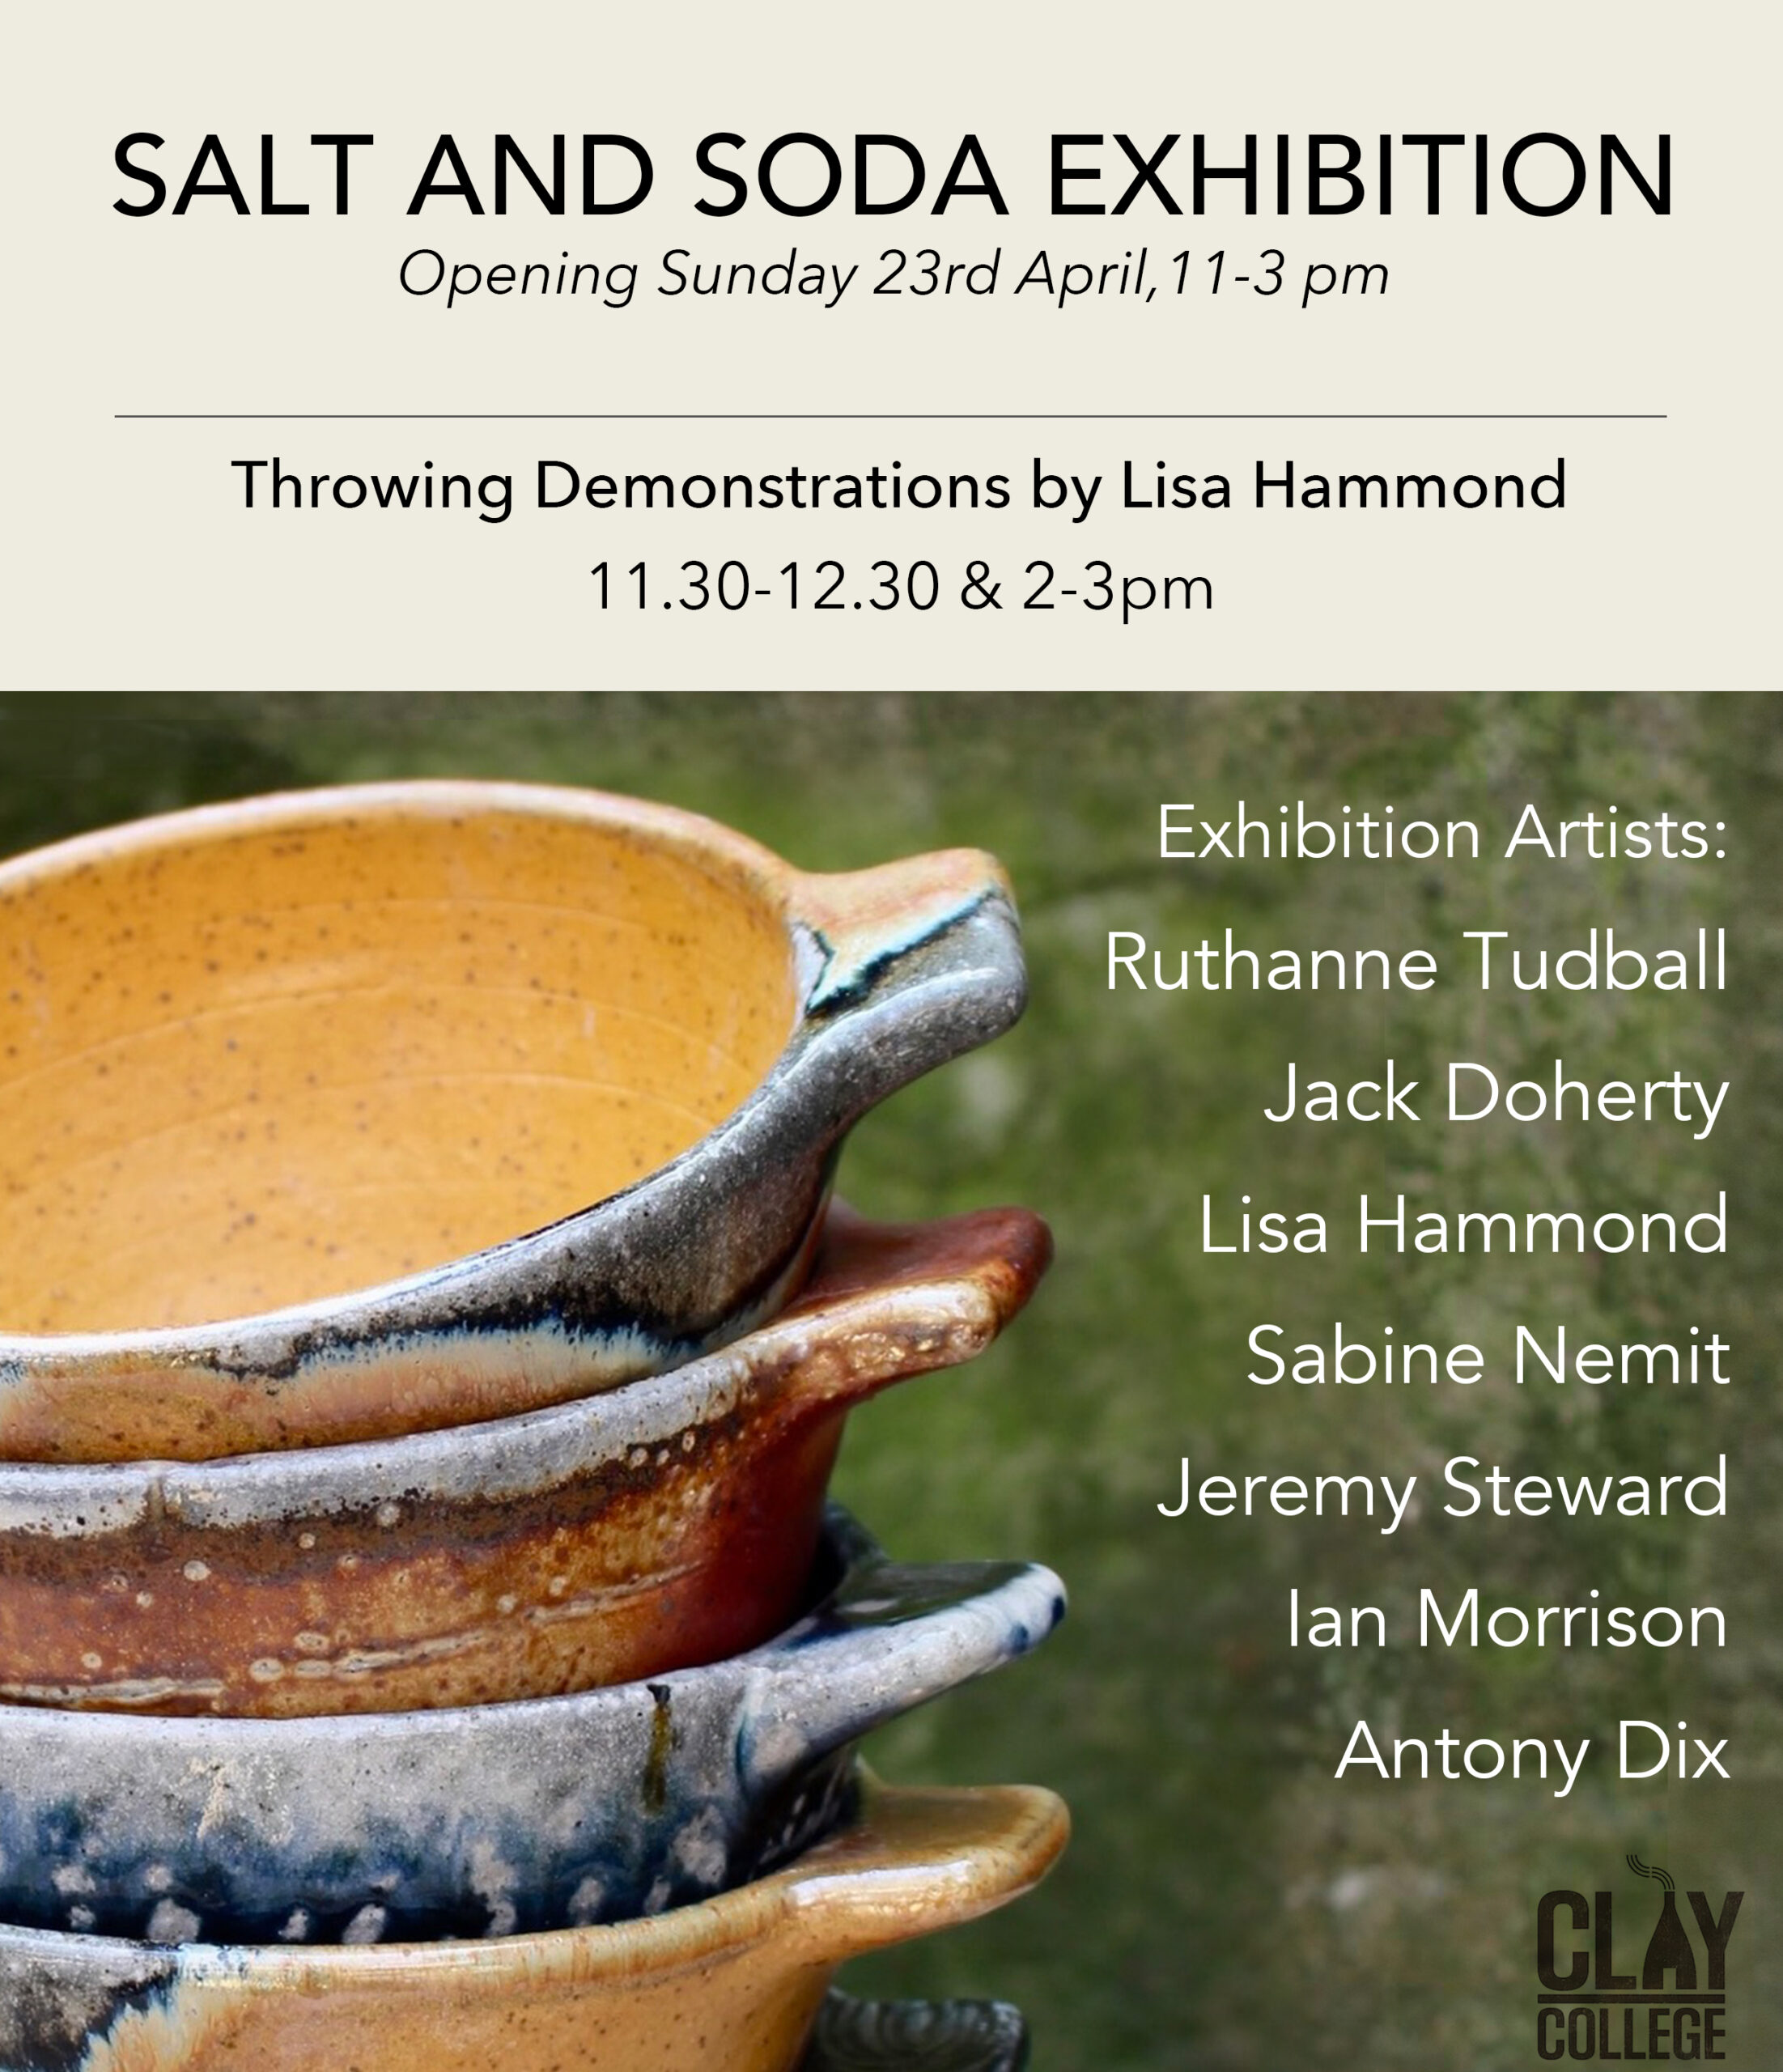 A poster with four baking dishes and artists taking part in the Salt and Soda exhibition